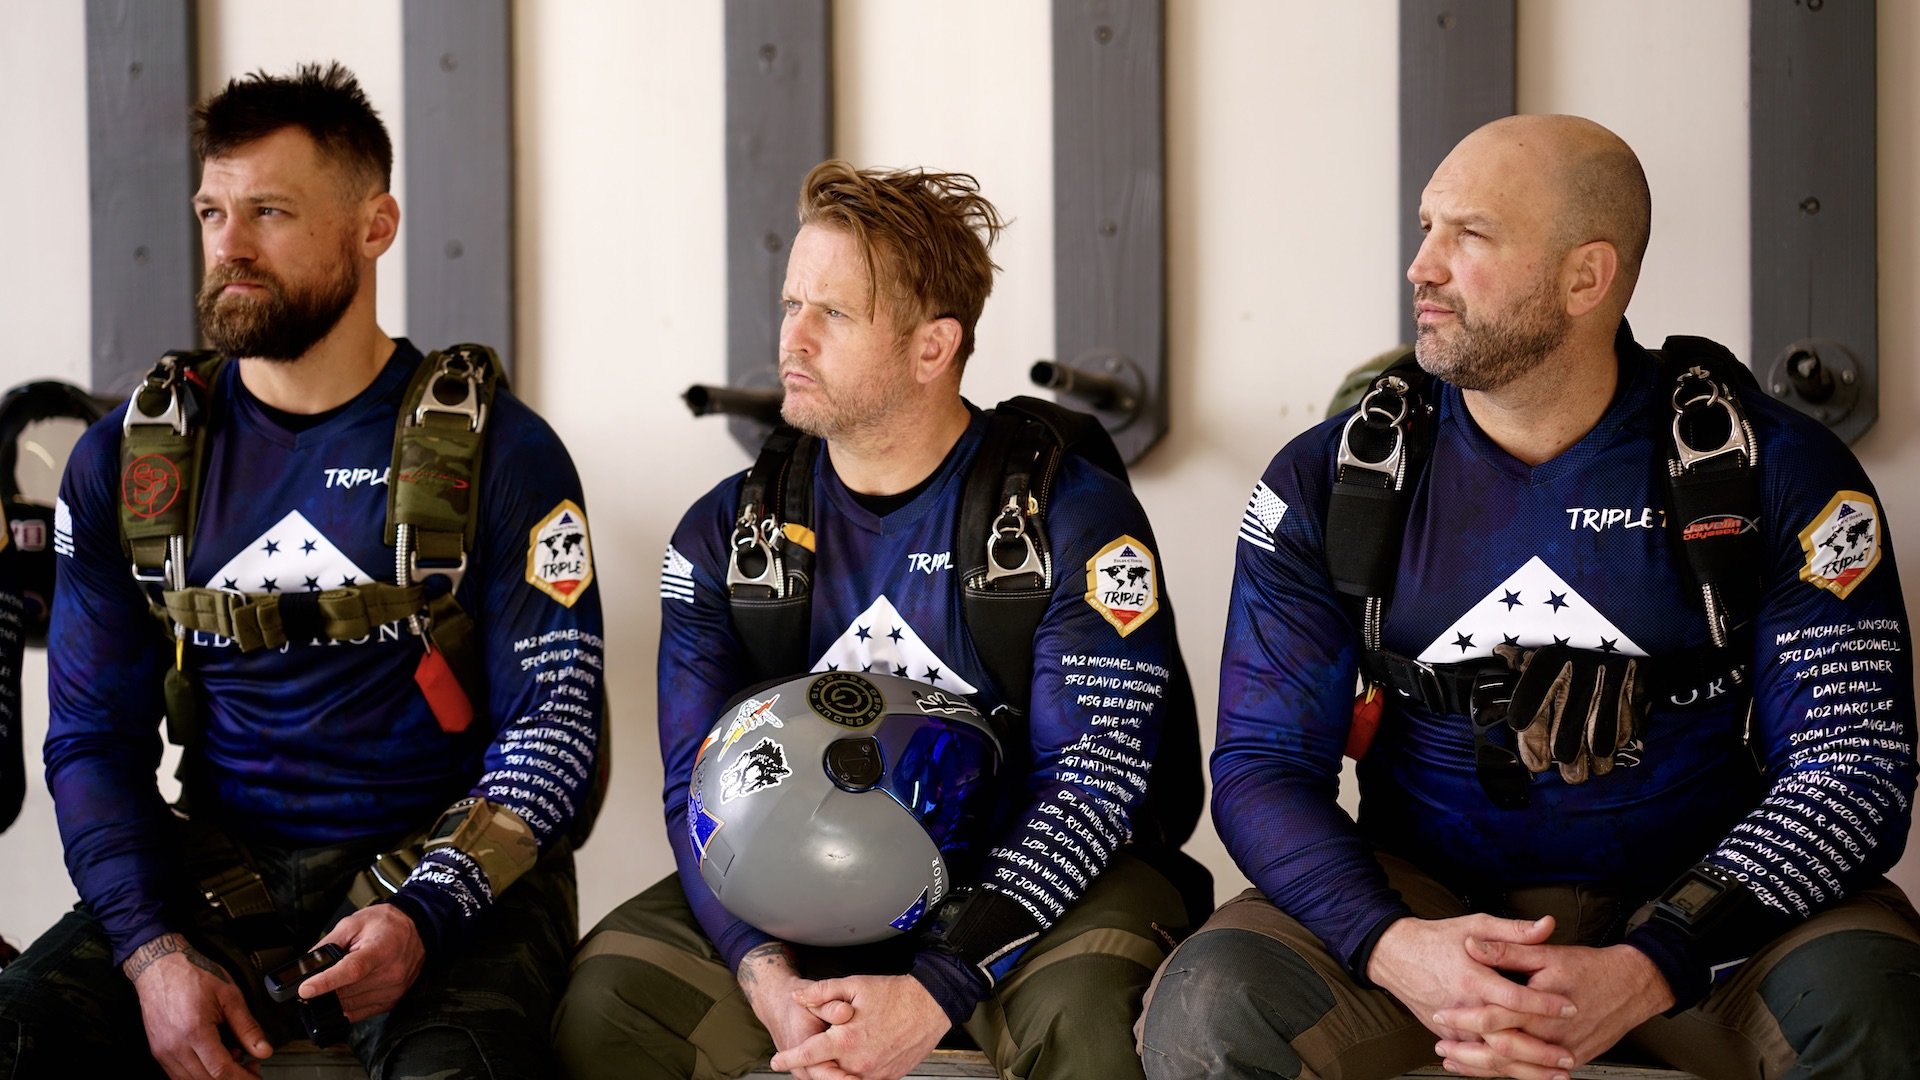 From left to right, Triple 7 team members Logan Stark, Jariko Denman, and Glenn Cowan prepare for a skydive on a training trip from Dec. 5 through 7, 2022, to Complete Parachute Solutions in Coolidge, Arizona. Legacy Expeditions photo.